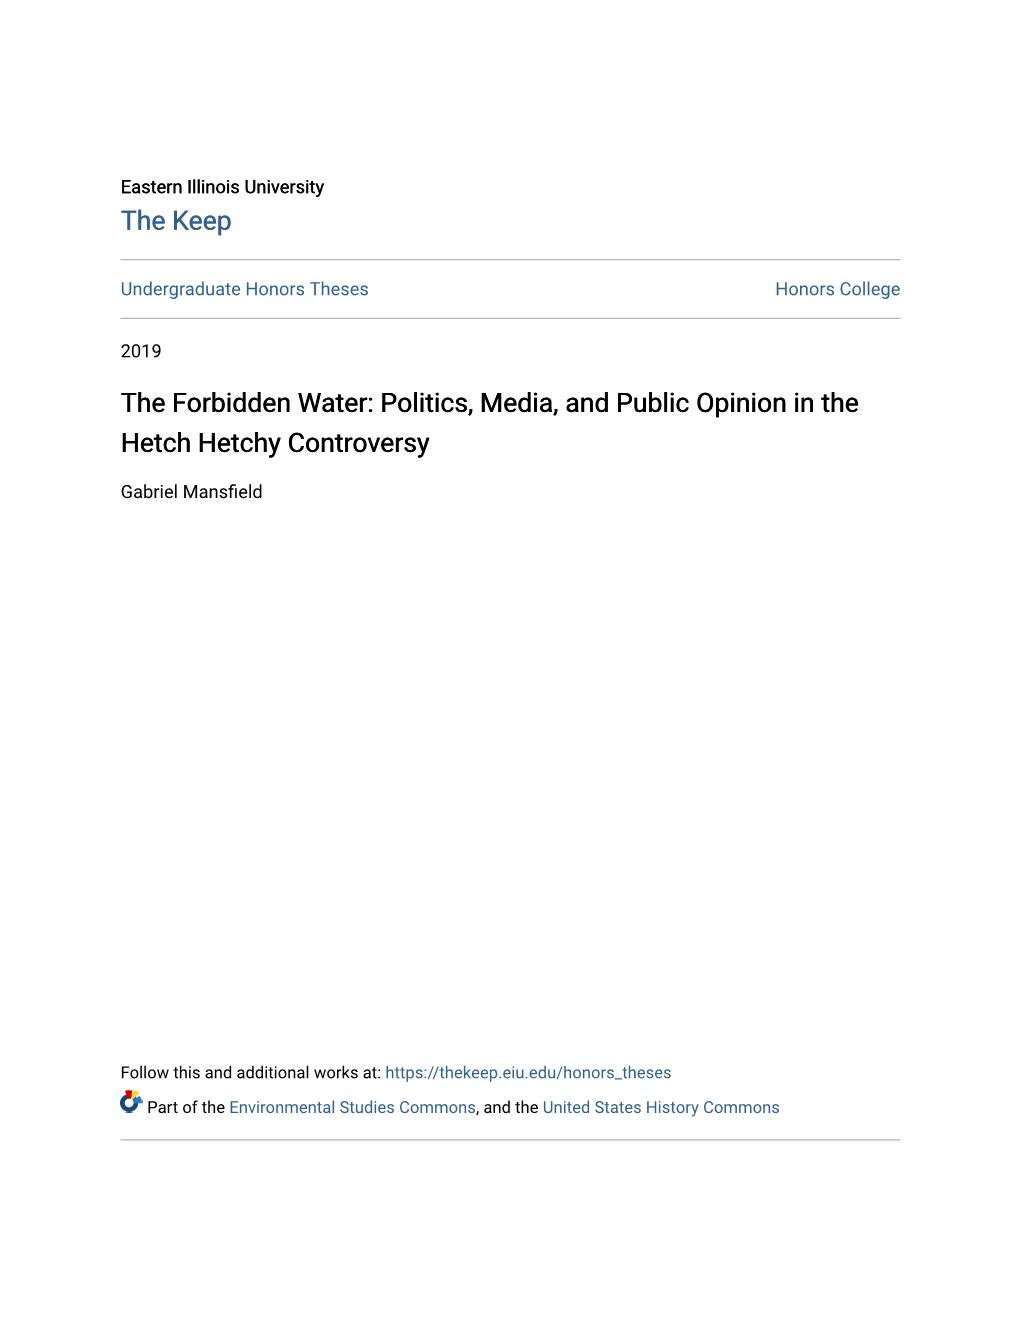 Politics, Media, and Public Opinion in the Hetch Hetchy Controversy